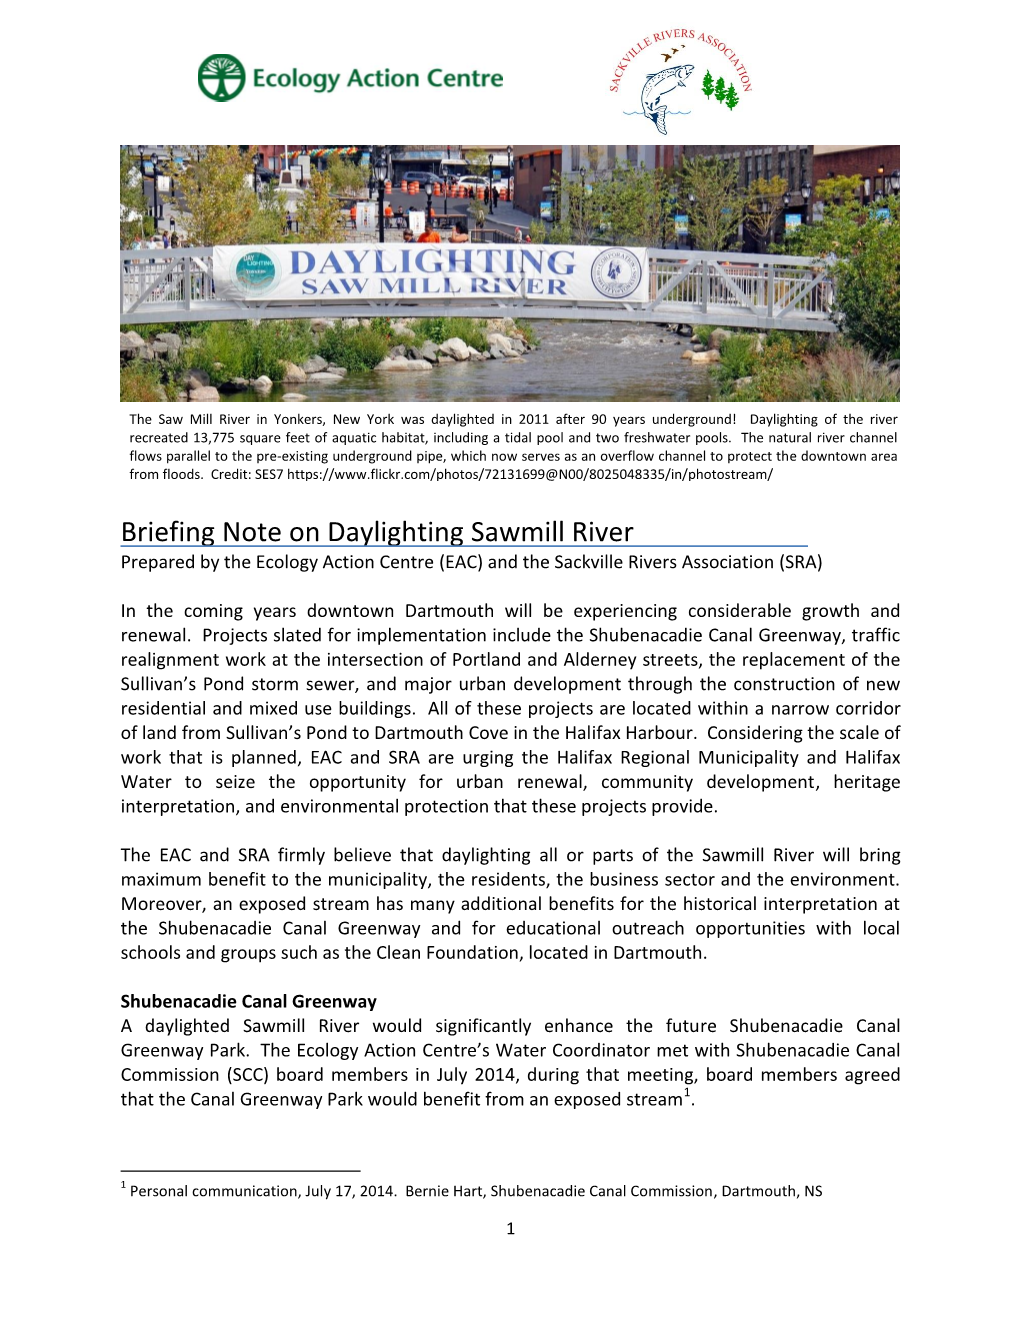 Briefing Note on Daylighting Sawmill River Prepared by the Ecology Action Centre (EAC) and the Sackville Rivers Association (SRA)